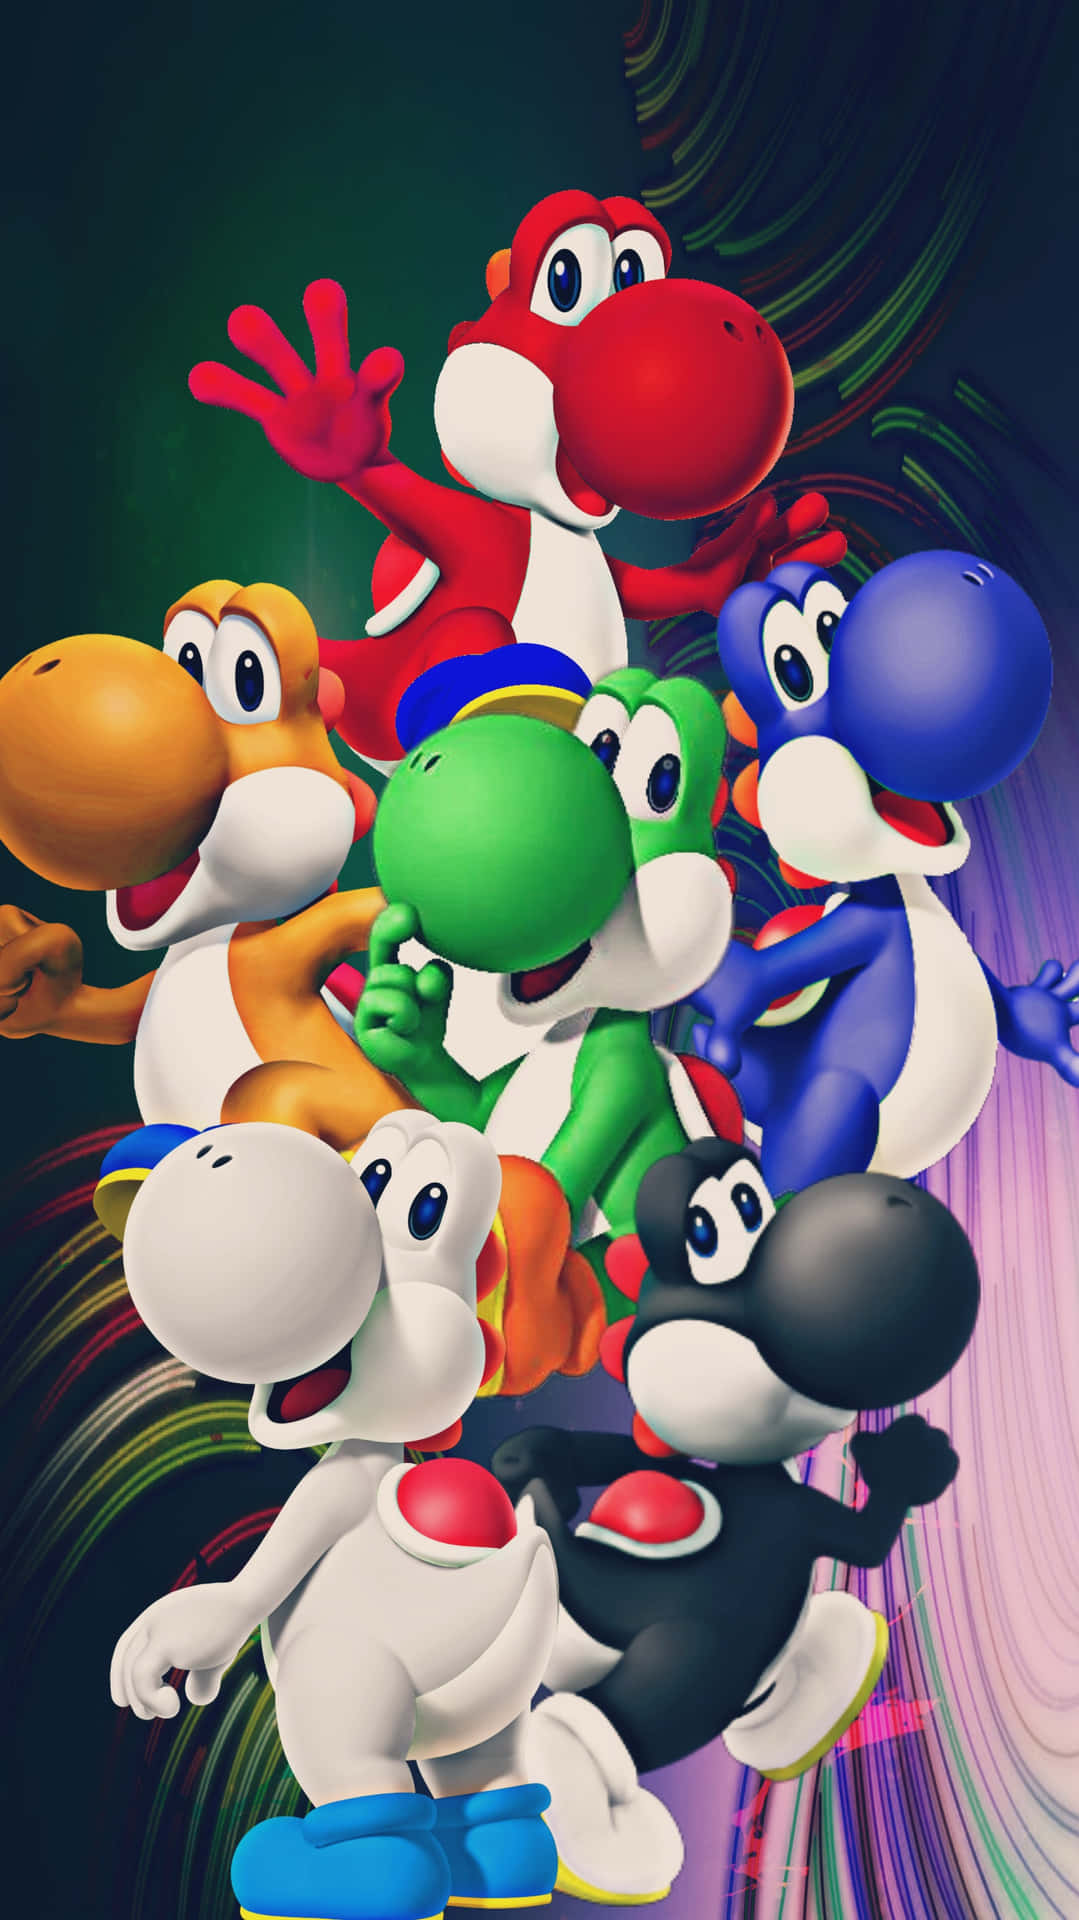 Yoshi - He's Here To Jump Into Your Wildest Adventures! Background